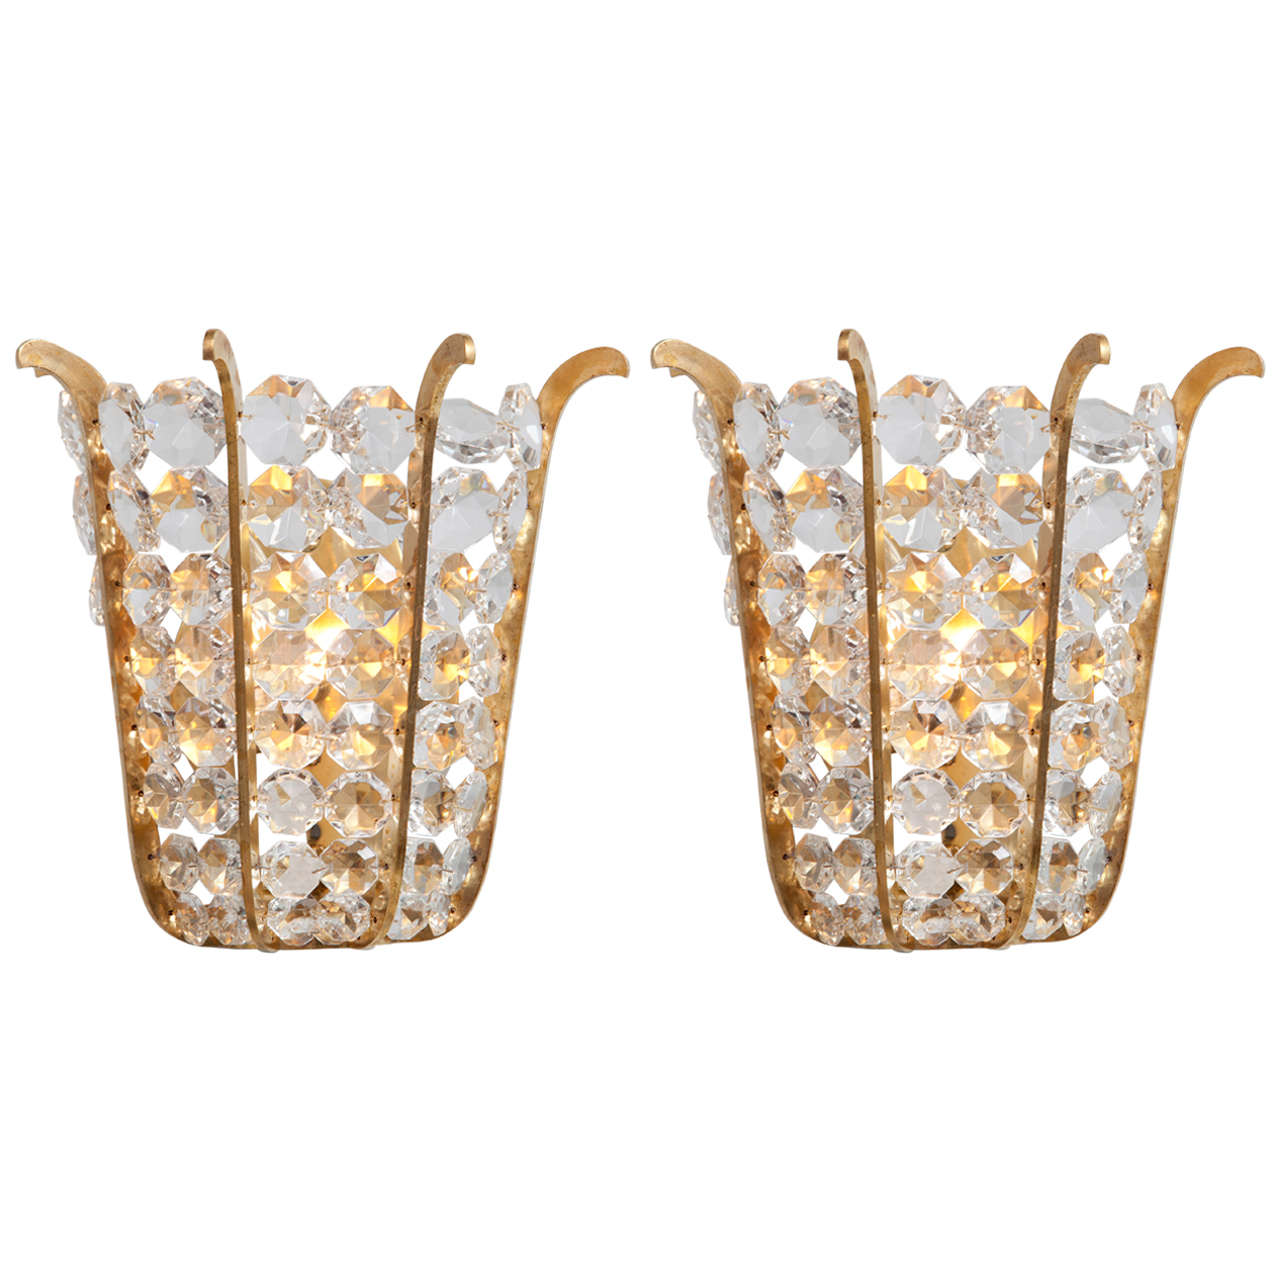 Pair of Austrian Beaded Crystal Sconces For Sale